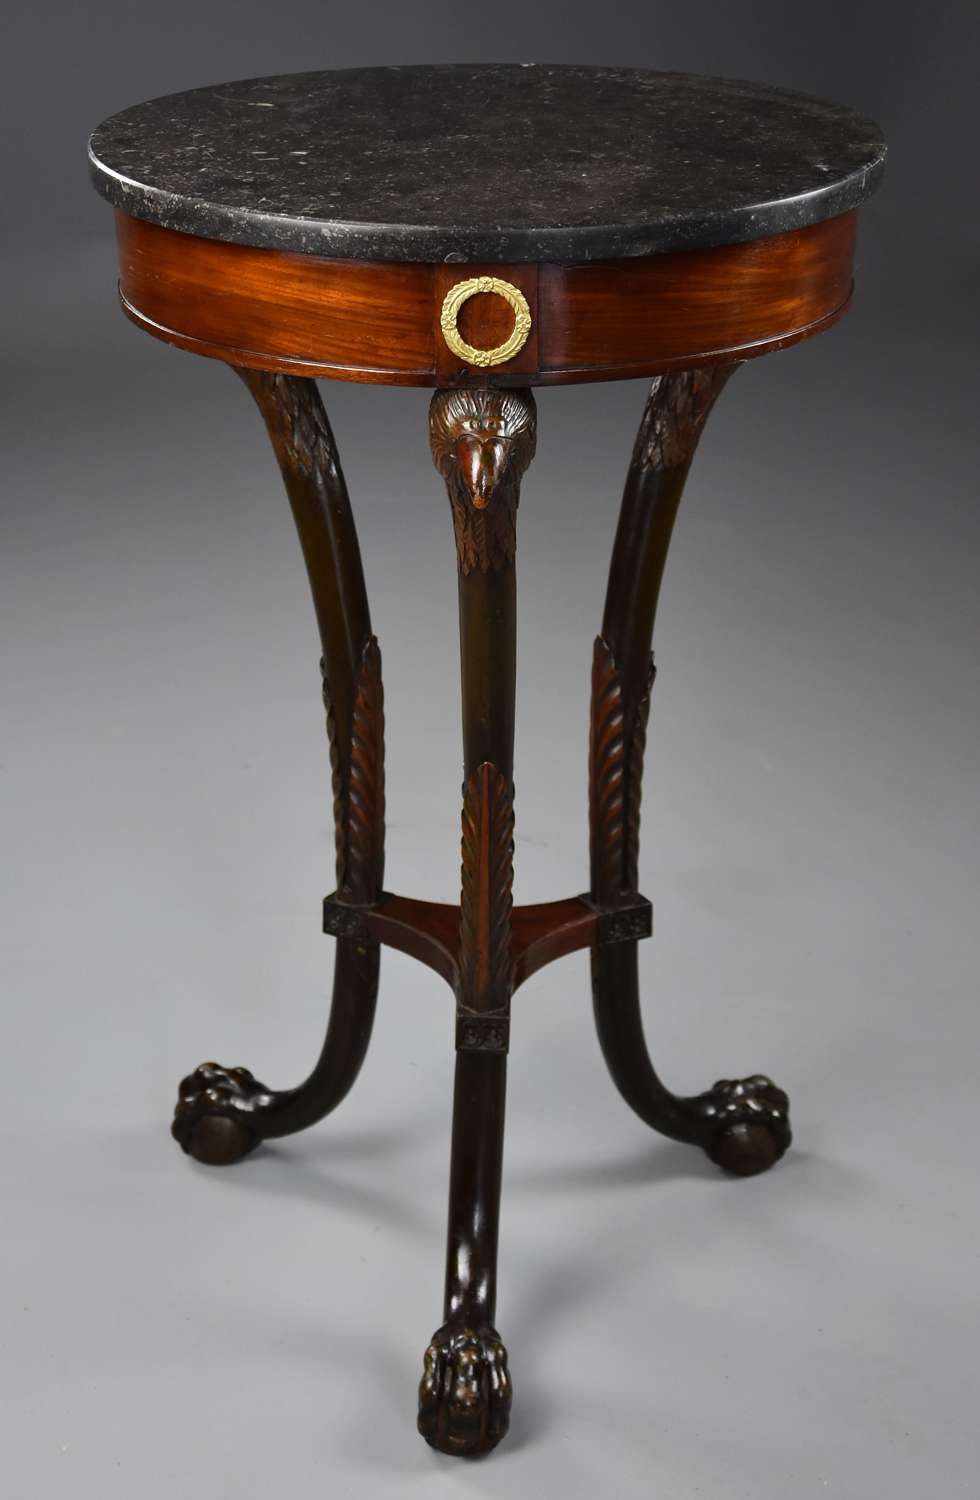 Late 18thc French Empire mahogany gueridon table of small proportions